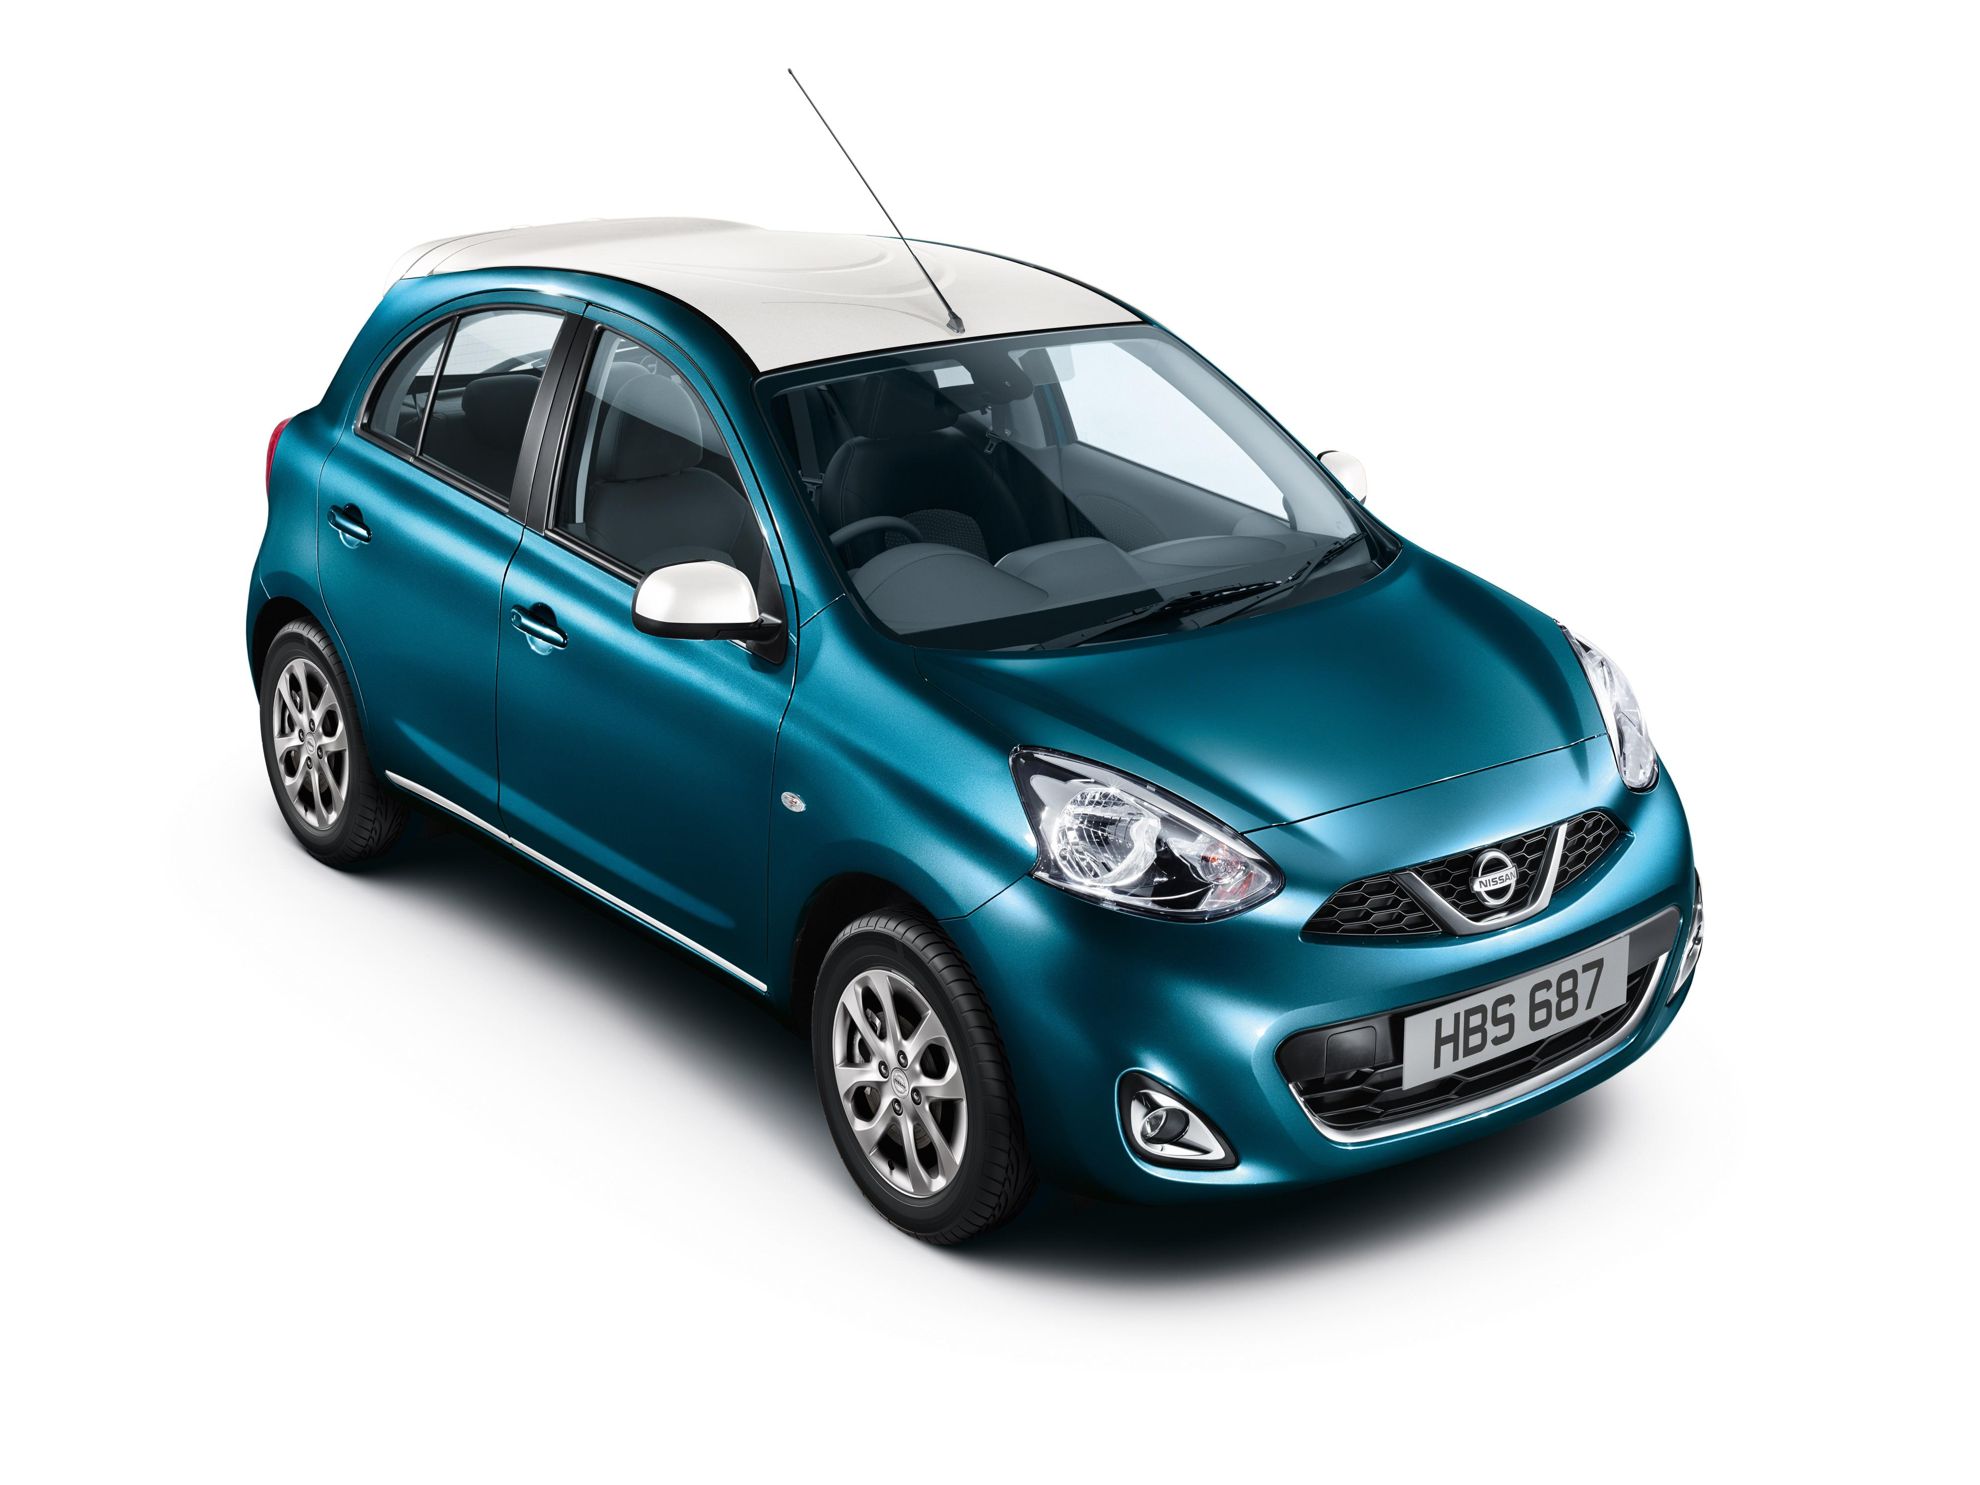 NISSAN LAUNCHES THE LIMITED EDITION NEW MICRA